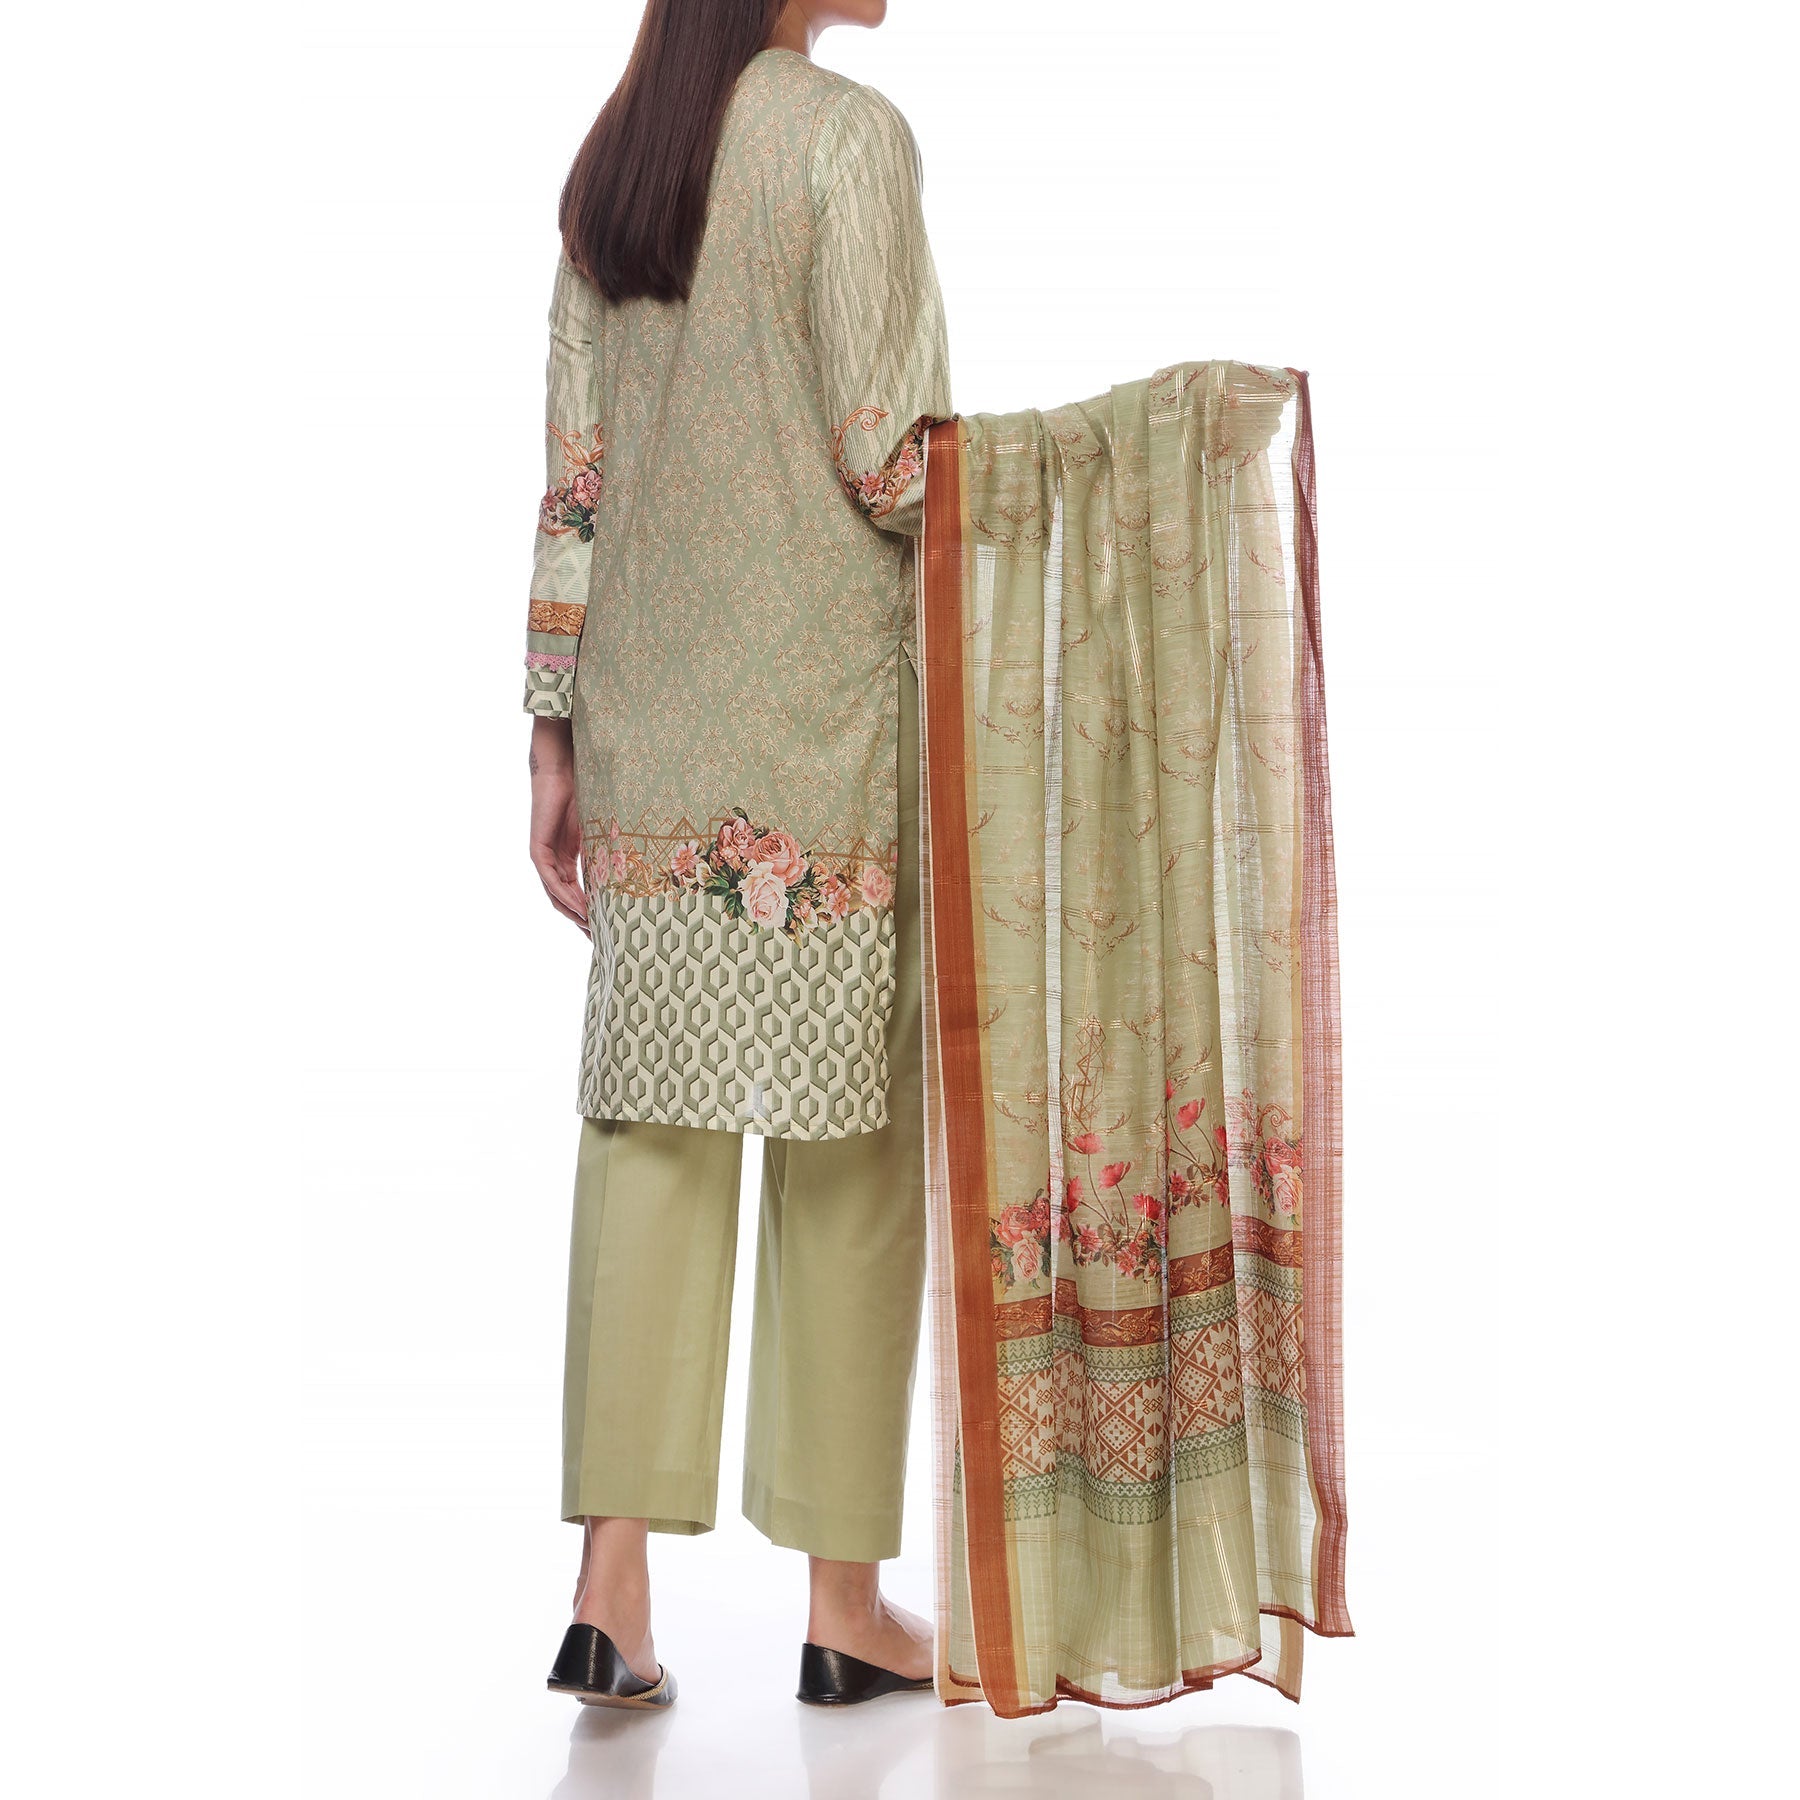 Digital Printed Lawn Shirt With Embroiderd Neck Line
Digtal Printed Tila Border Dupatta
Plain Dyed Cambric Trousers